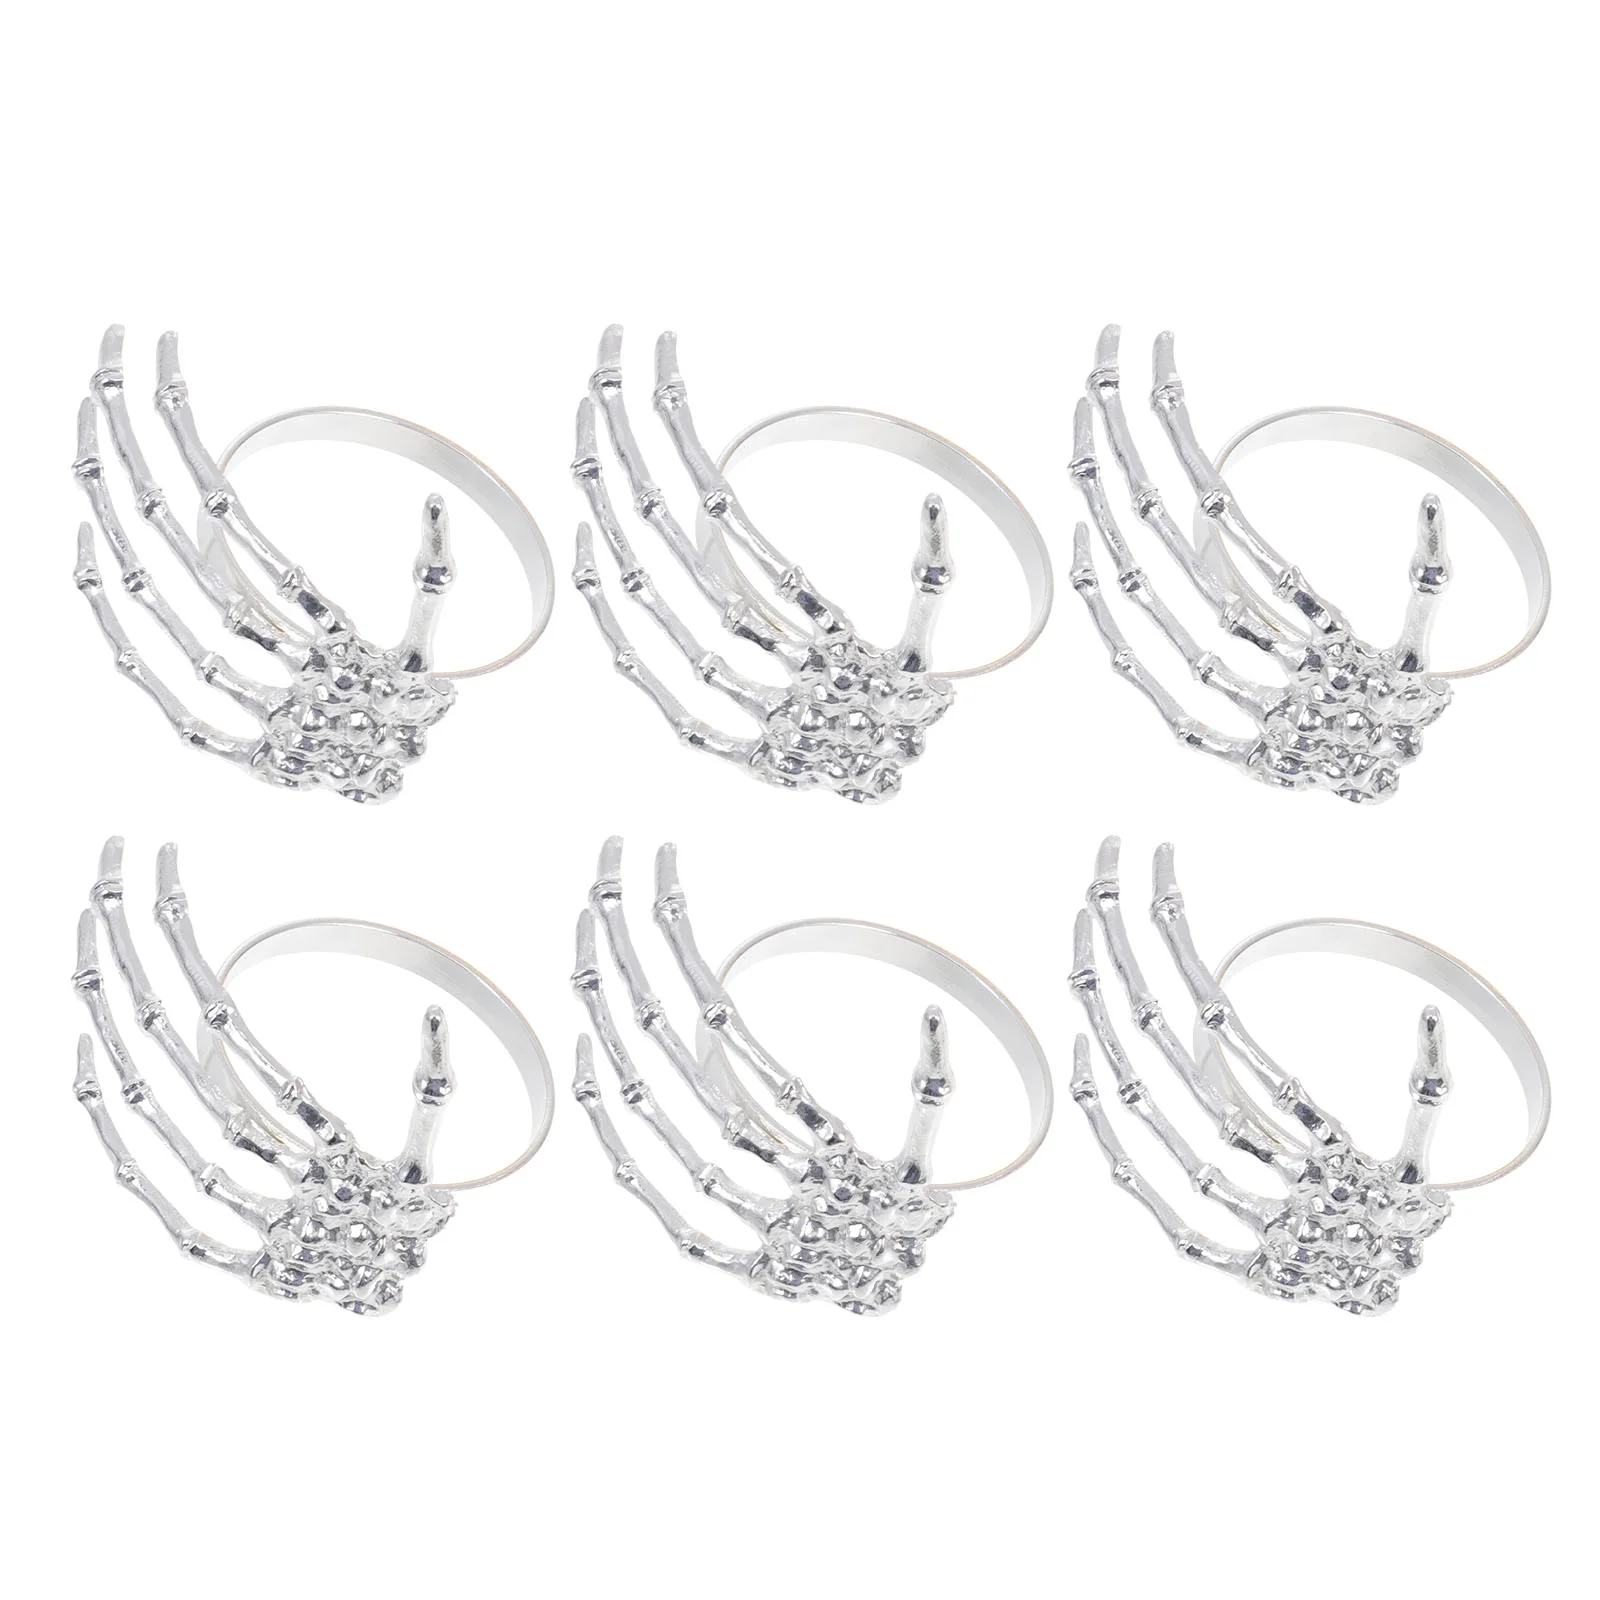 

6 Pcs Ghost Hand Napkin Buckle Clips Alloy Buckles Decor Table Supplies Decors Ferroalloy Palm Shaped Rings Banquet Fall